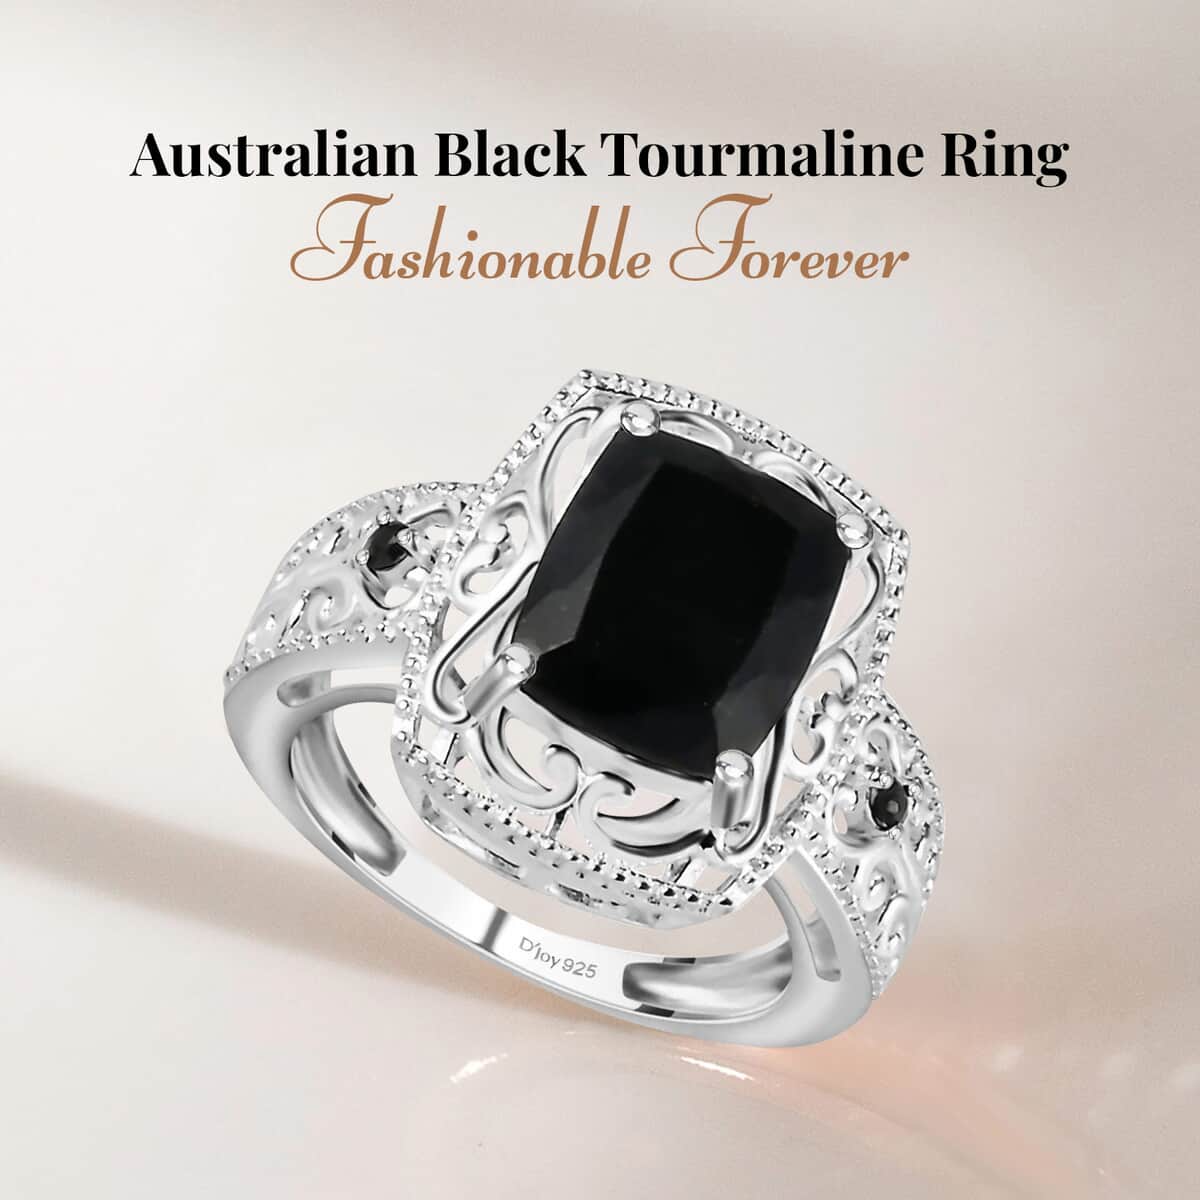 Australian Black Tourmaline and Thai Black Spinel 3.60 ctw Ring, Fashion Ring in Sterling Silver, Black Engagement Rings For Her (Size 6.0) image number 1